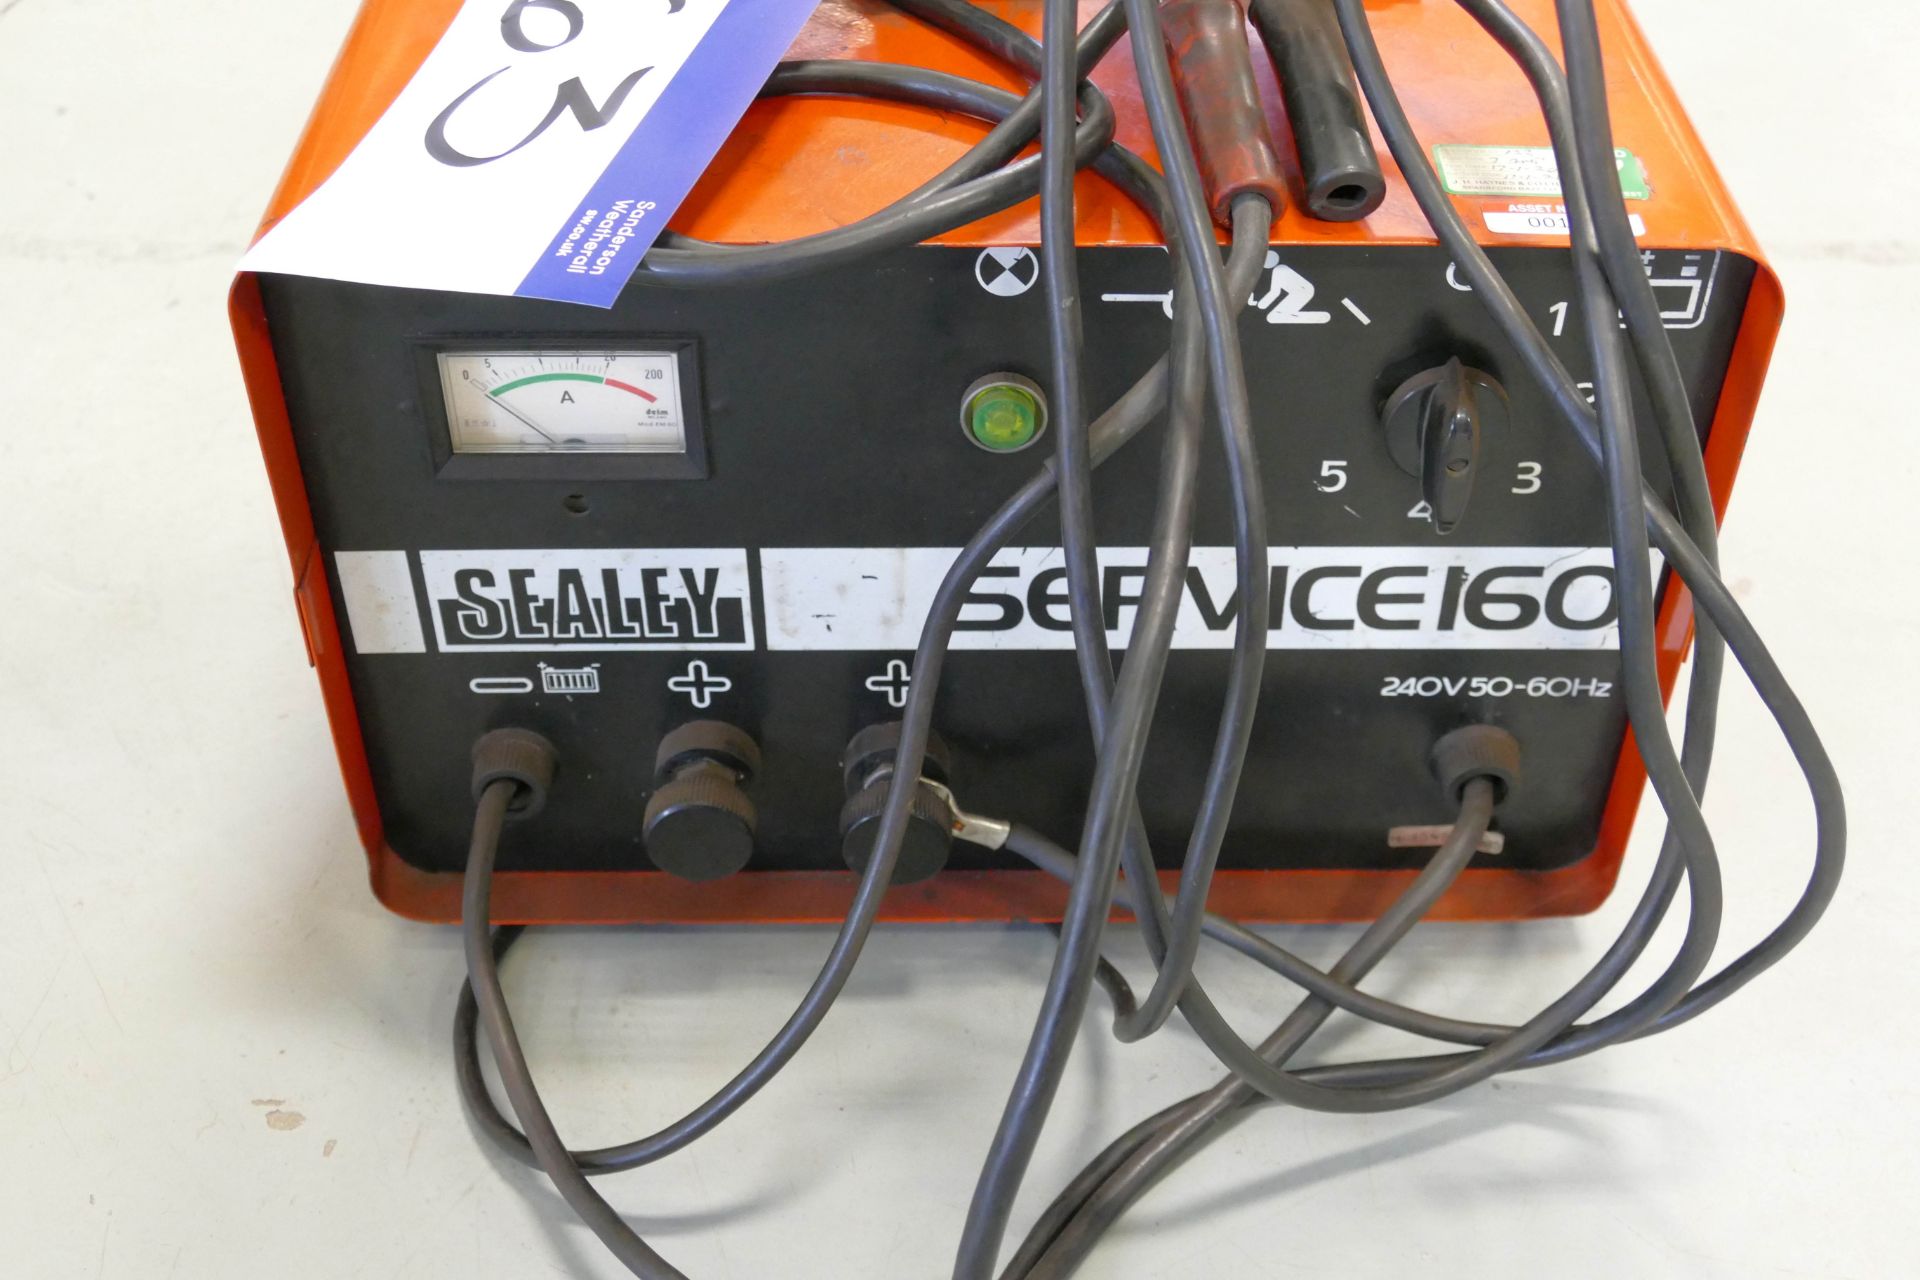 Sealey Service 160 Battery Charger, 240V - Image 2 of 2